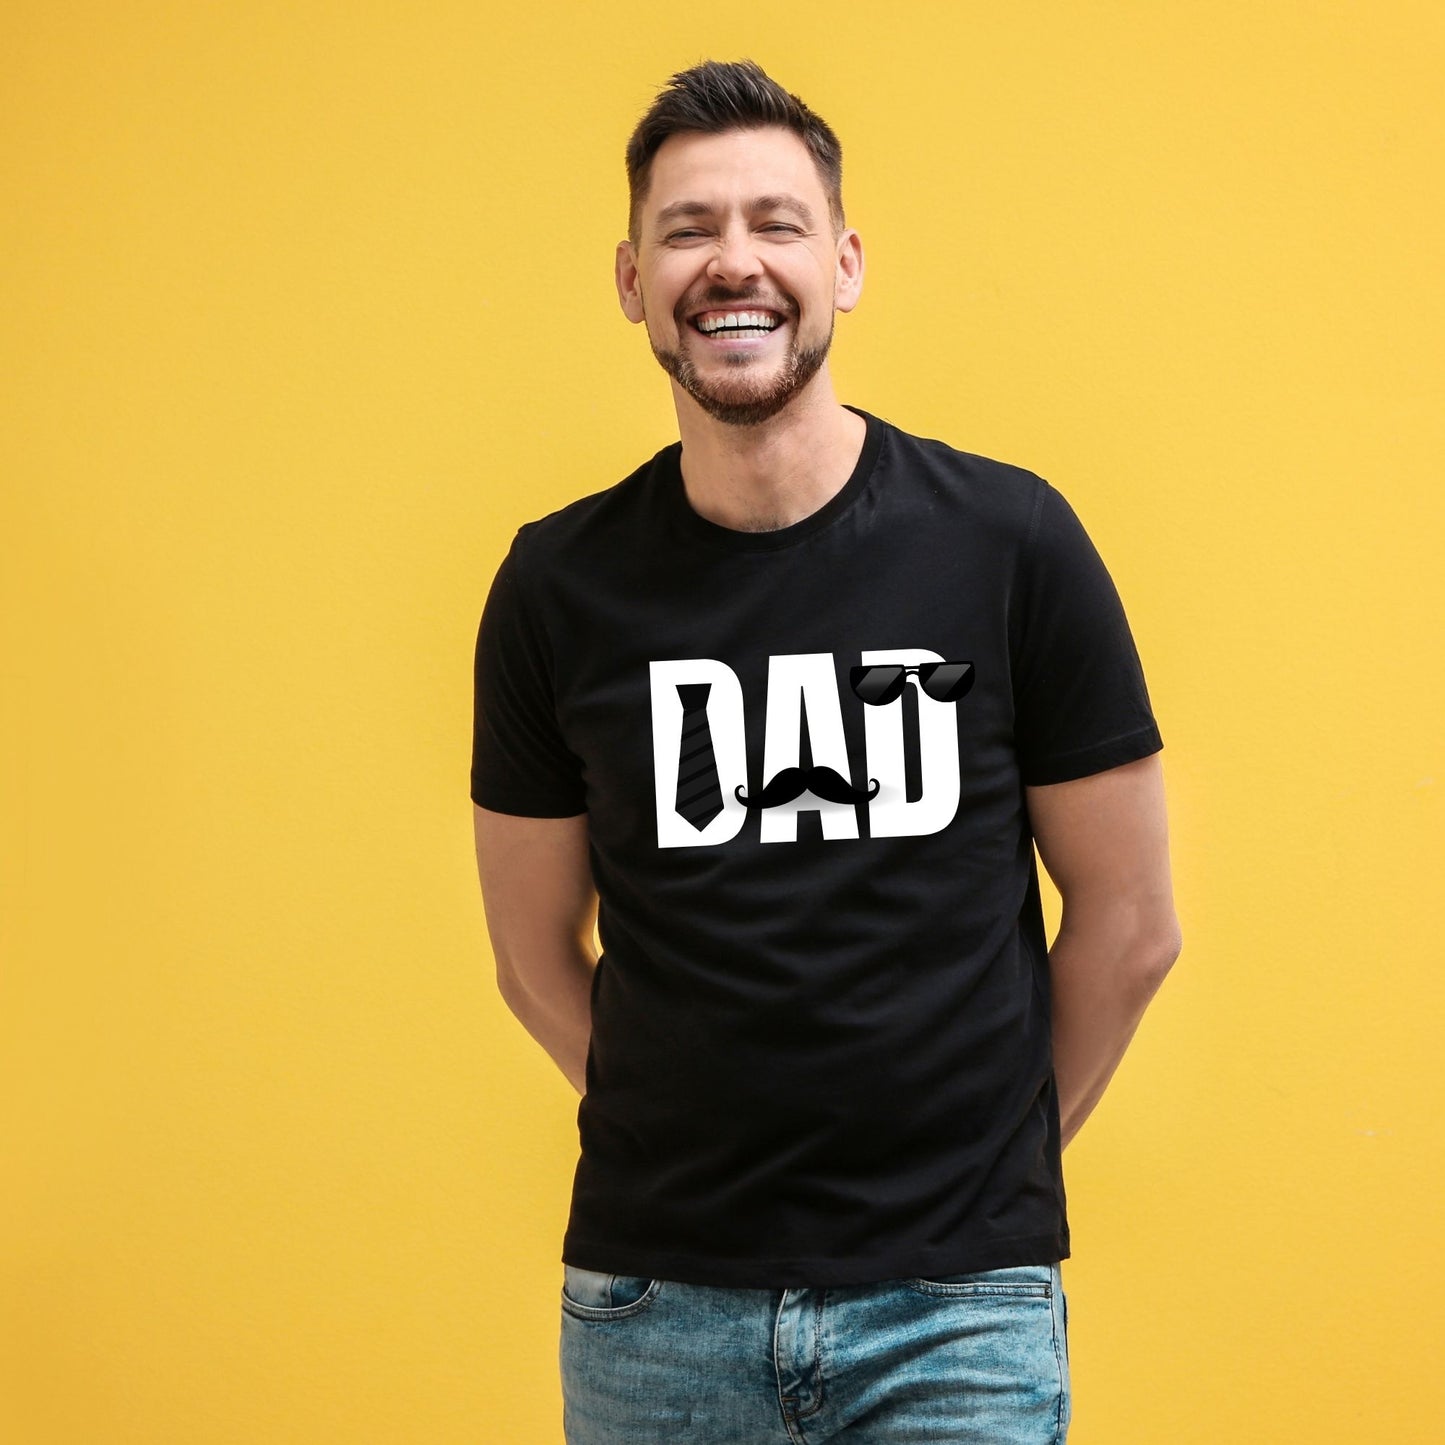 "Cool Dad" Shirt - Father's Day Gift